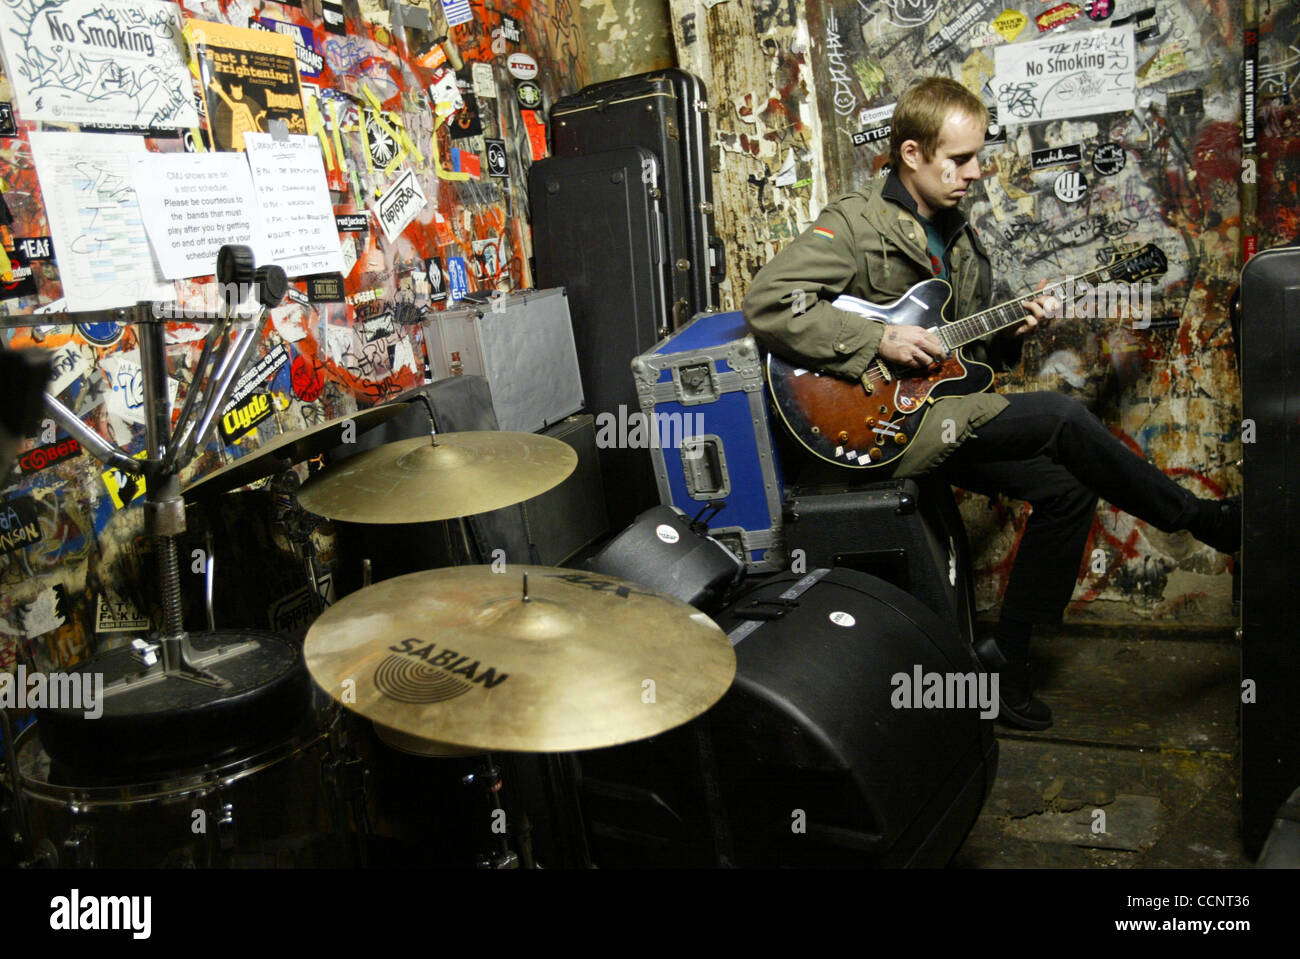 Oct 24, 2003; Manhatten, NY, USA; TED LEO of the 'Ted Leo Band' preforms at CBGB's on the Bowery in Manhattan for the CMJ music festival. Ted practices some tunes backstage and does some streches before going on stage. Ted Leo, guitar and vocals, Dave Lerner, bass, Chris Wilson, drums. Stock Photo